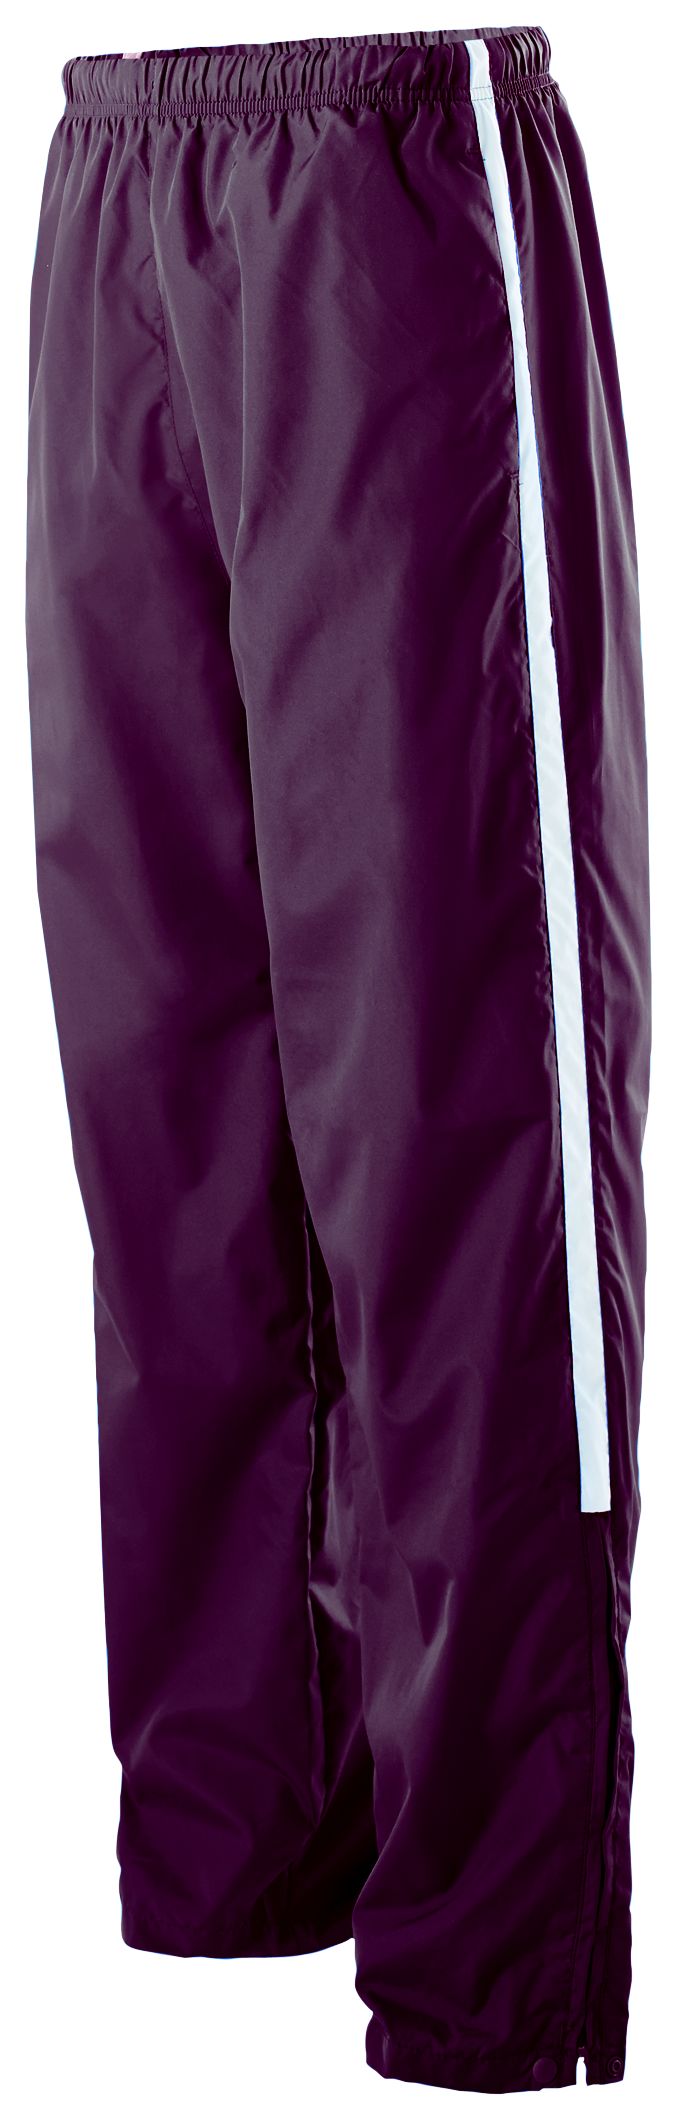 Holloway Sable Pant in Maroon/White  -Part of the Adult, Adult-Pants, Pants, Holloway product lines at KanaleyCreations.com